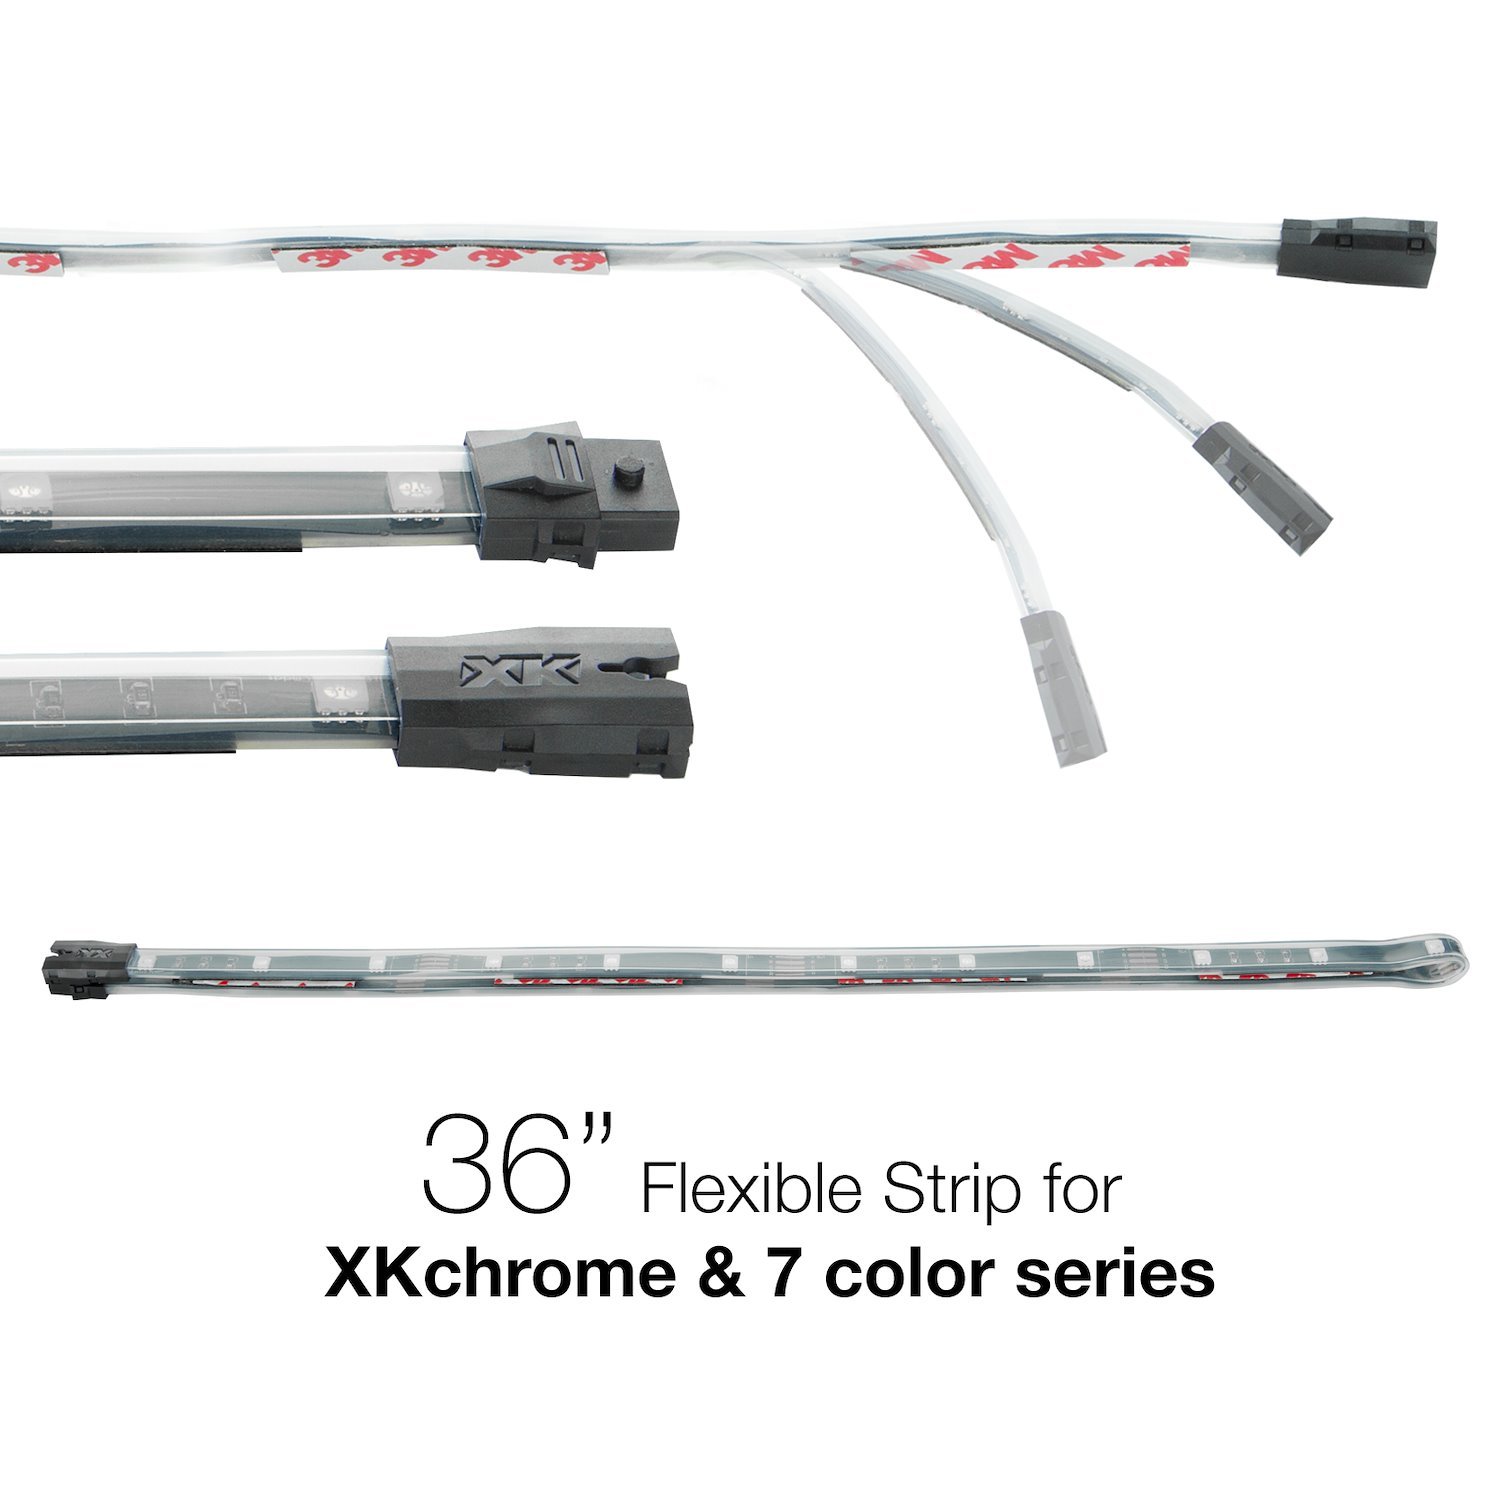 XK-4P-S-36 36 in. Multi-Color Flexible Strip, for XKCHROME & 7-Color Series, Universal Fit